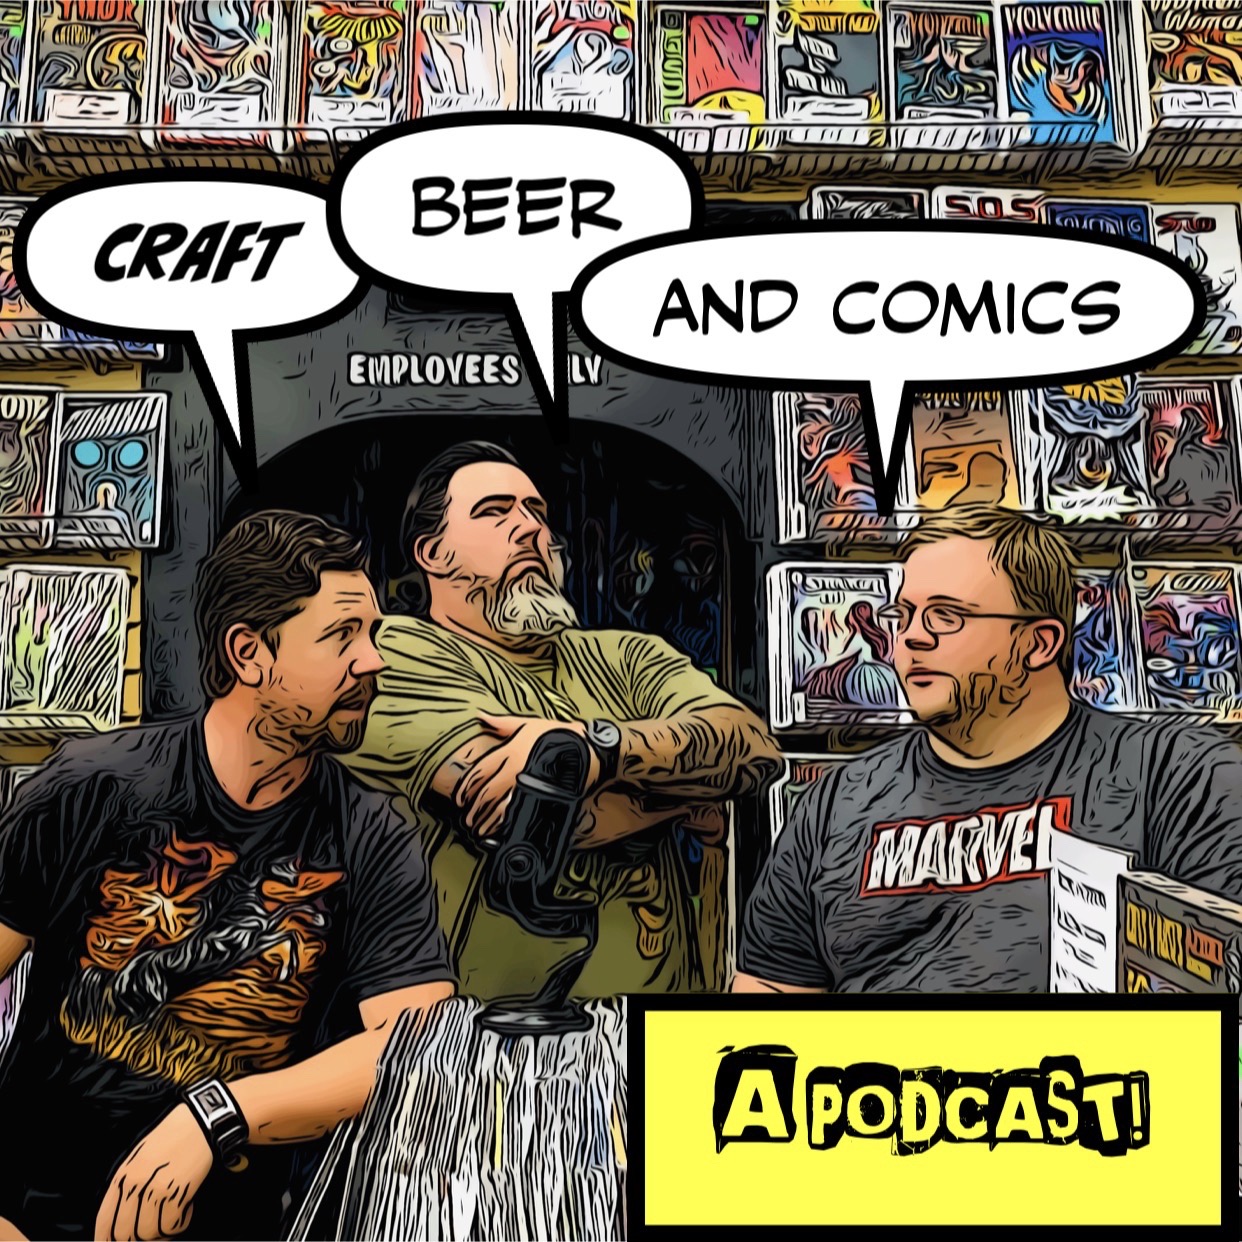 Craft Beer and Comics: A podcast